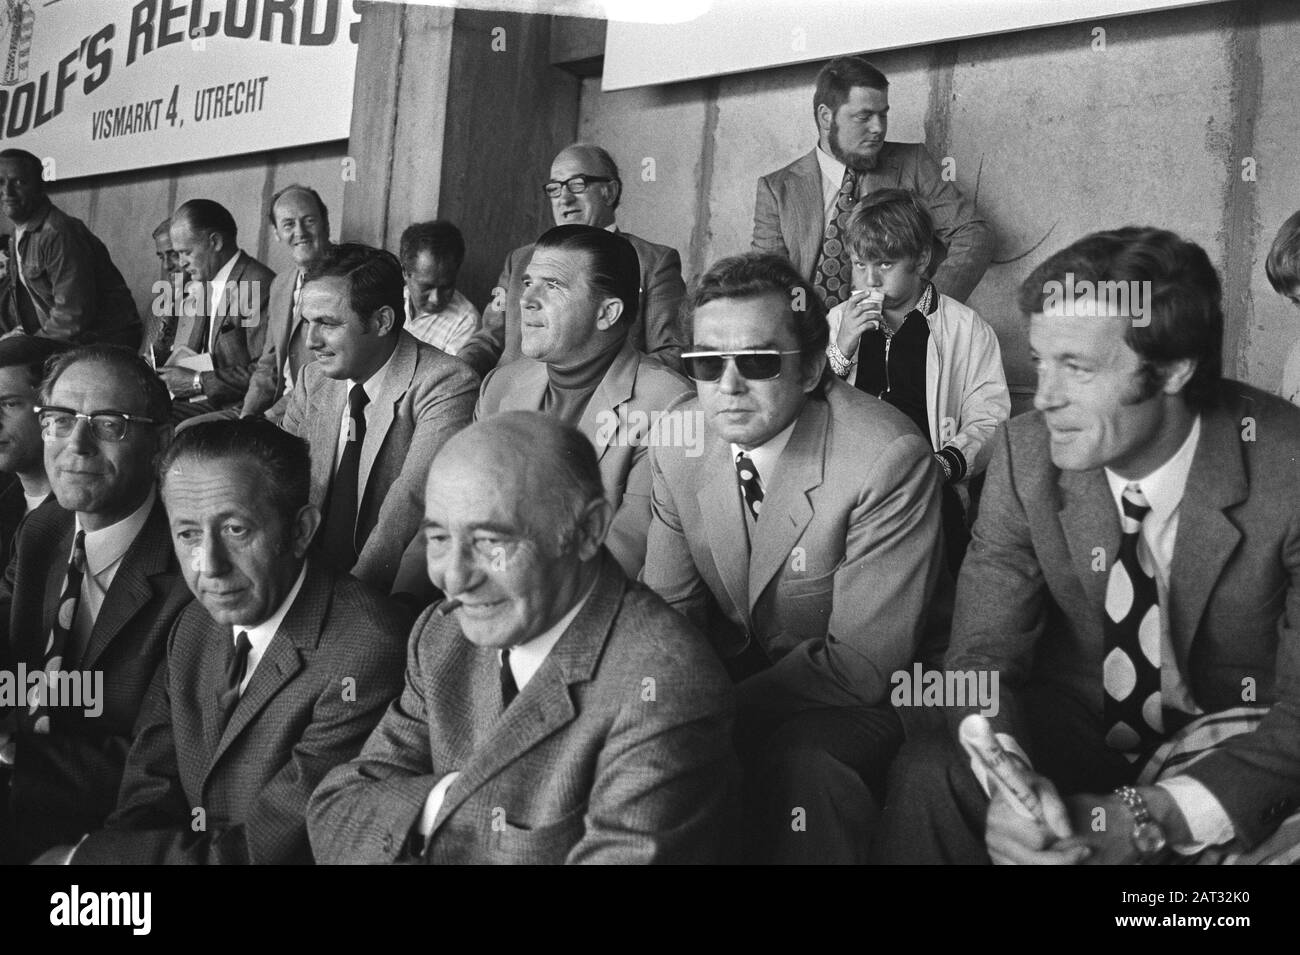 FC Utrecht vs. Ajax 0-3  Happel (with sunglasses), trainer of Feyenoord, in the stands, left next to him Puskas, trainer of Panathinaikos FC Date: 23 May 1971 Location: Utrecht (province), Utrecht (city) Keywords: sport, trainers, stands, football Personal name: Happel, Ernst, Puskas, Ferenc Institution name: FC Utrecht Stock Photo